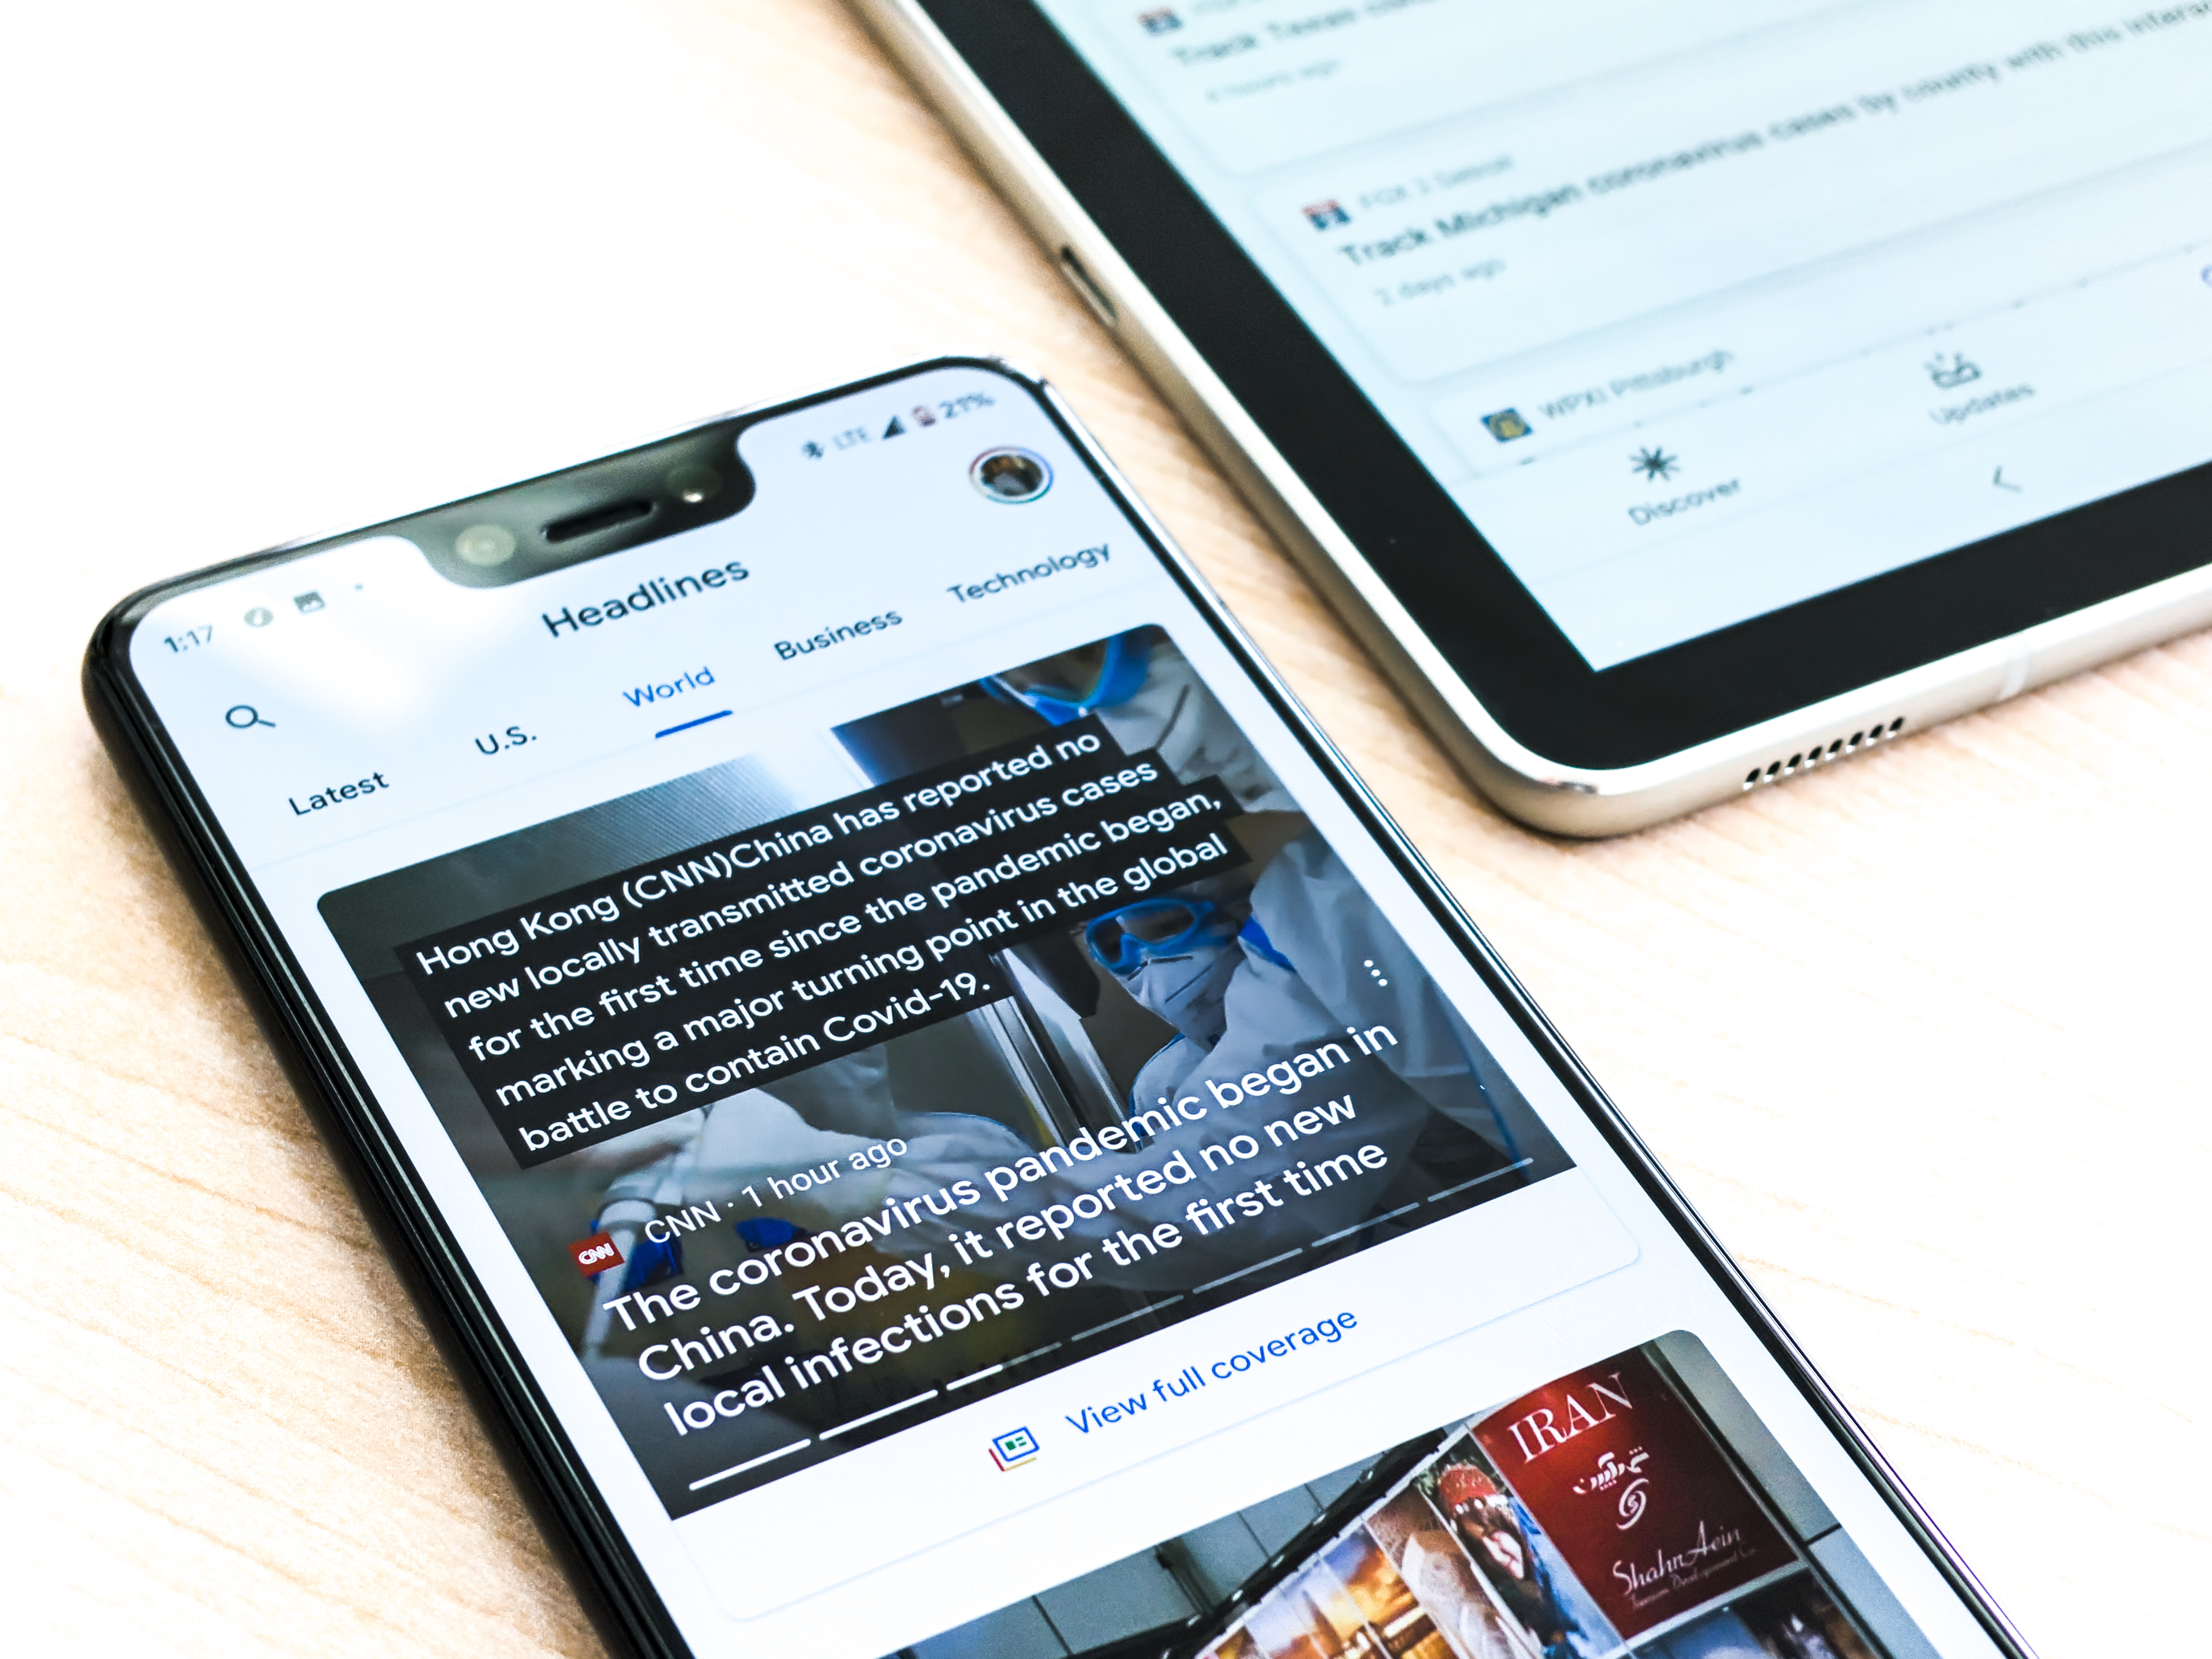 Rebel App Studio teams up with Google to create 20 news apps in record-breaking time 